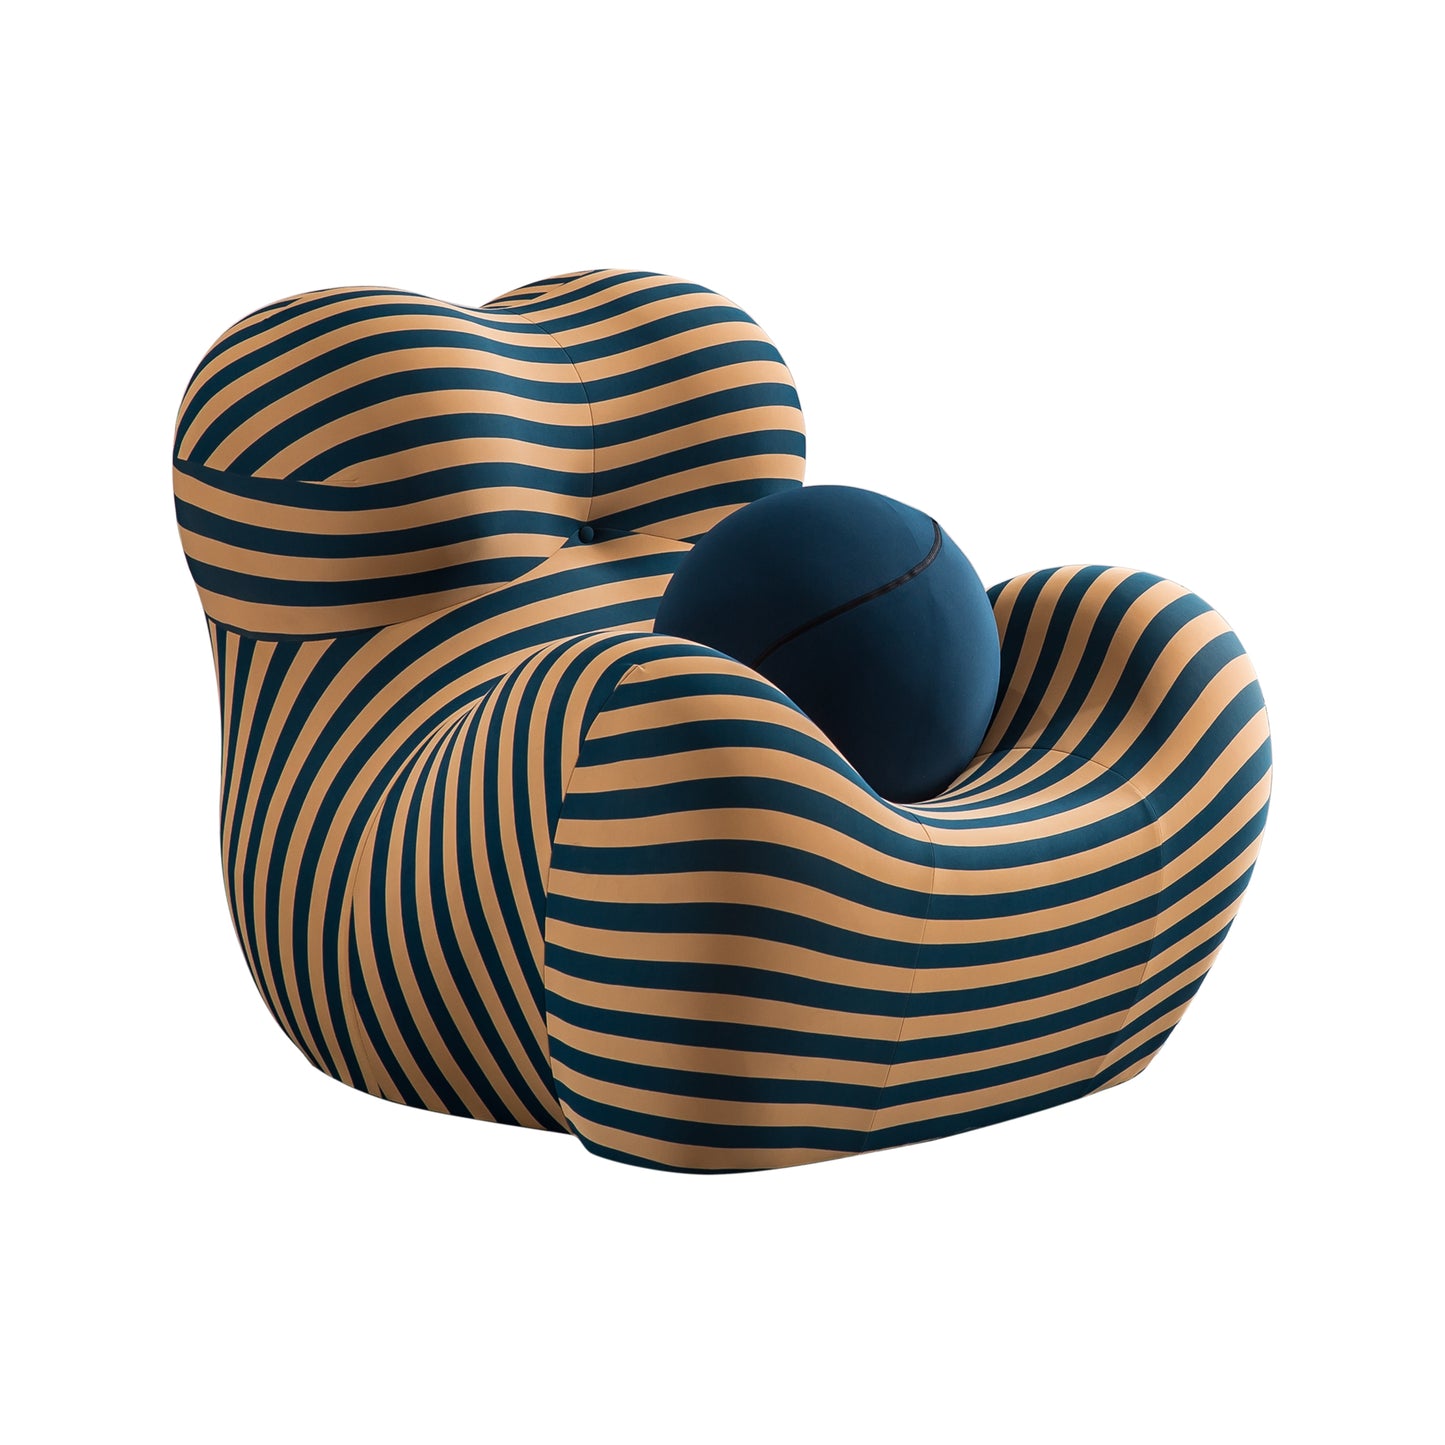 Stripe Barrel Chair and Ottoman Set - Modern and Comfortable Seating for Living Room (Available in 3 Colors and 2 Sizes) Large Size in Blue and Yellow Stripes